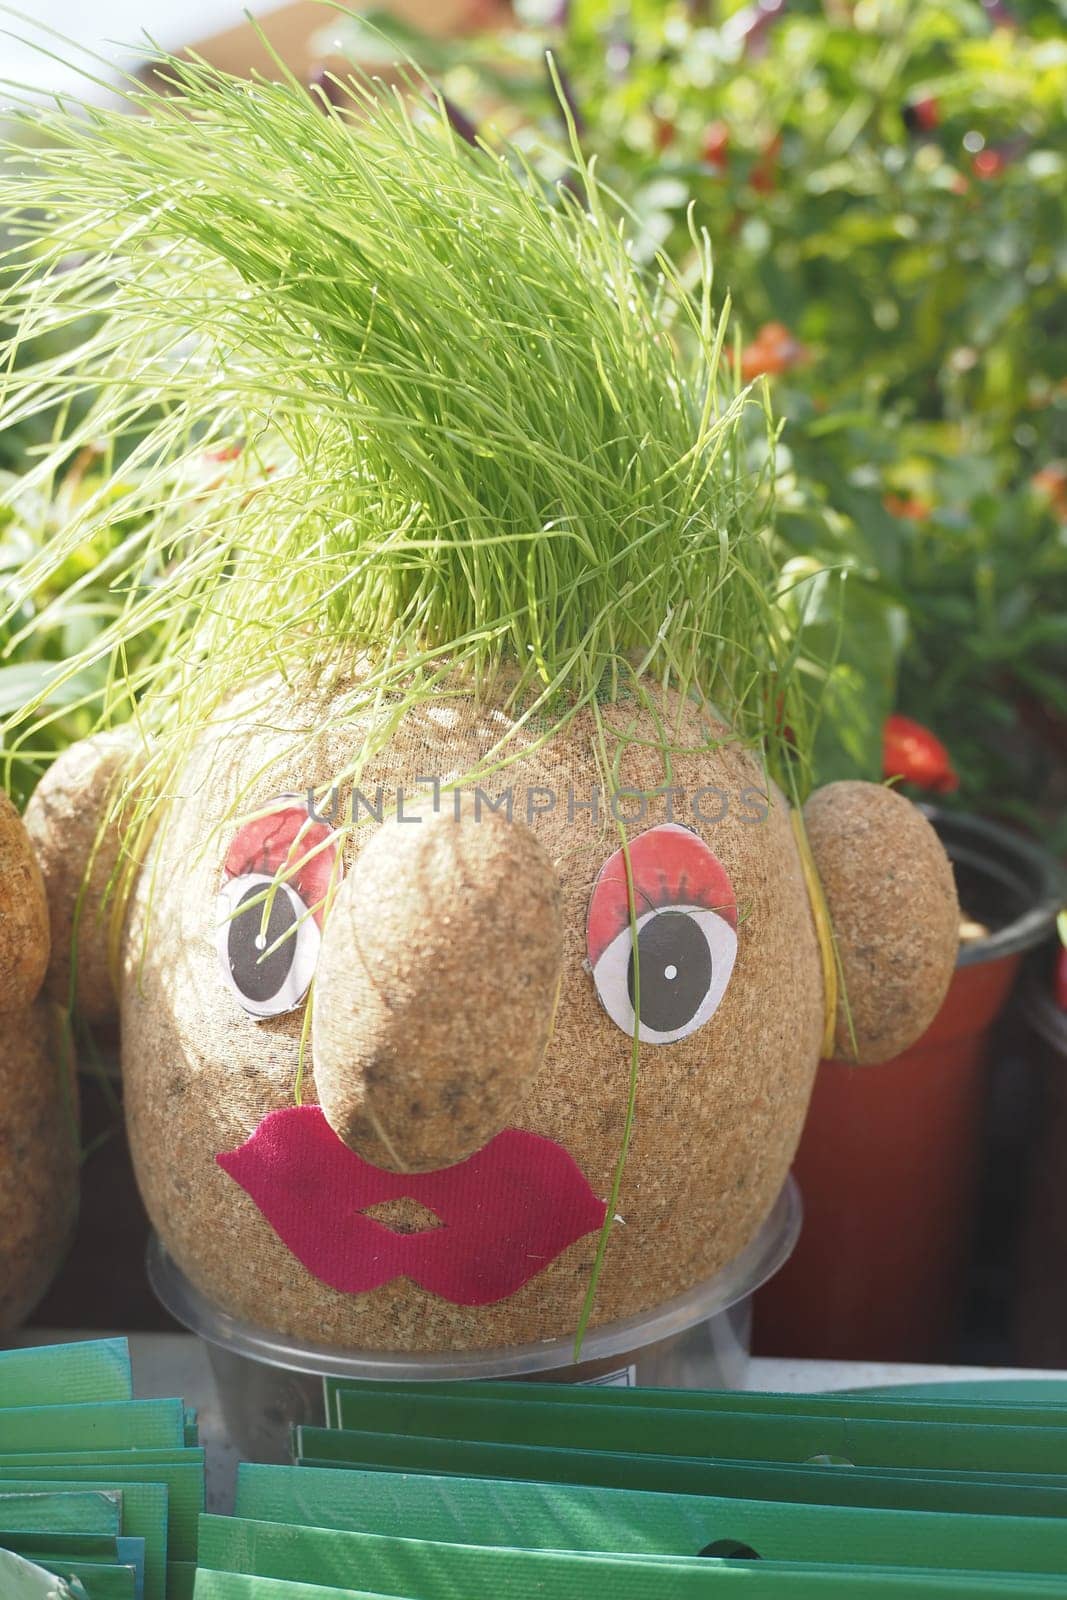 Handmade doll for growing grass seeds as hairs. Child education by towfiq007